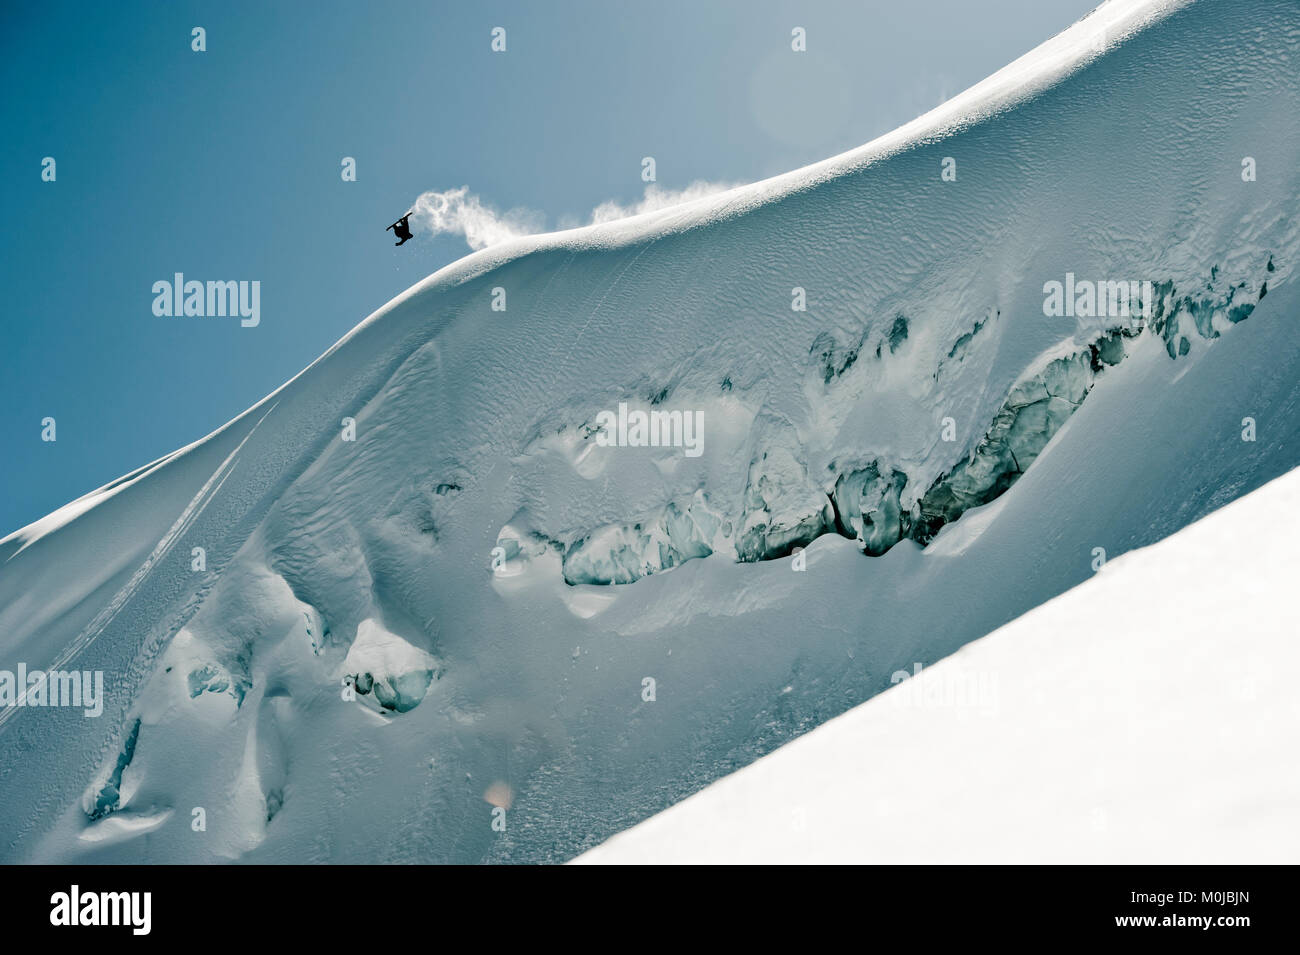 A professional, freeriding snowboarder flips mid-air on a snowy slope against a blue sky; British Columbia, Canada Stock Photo